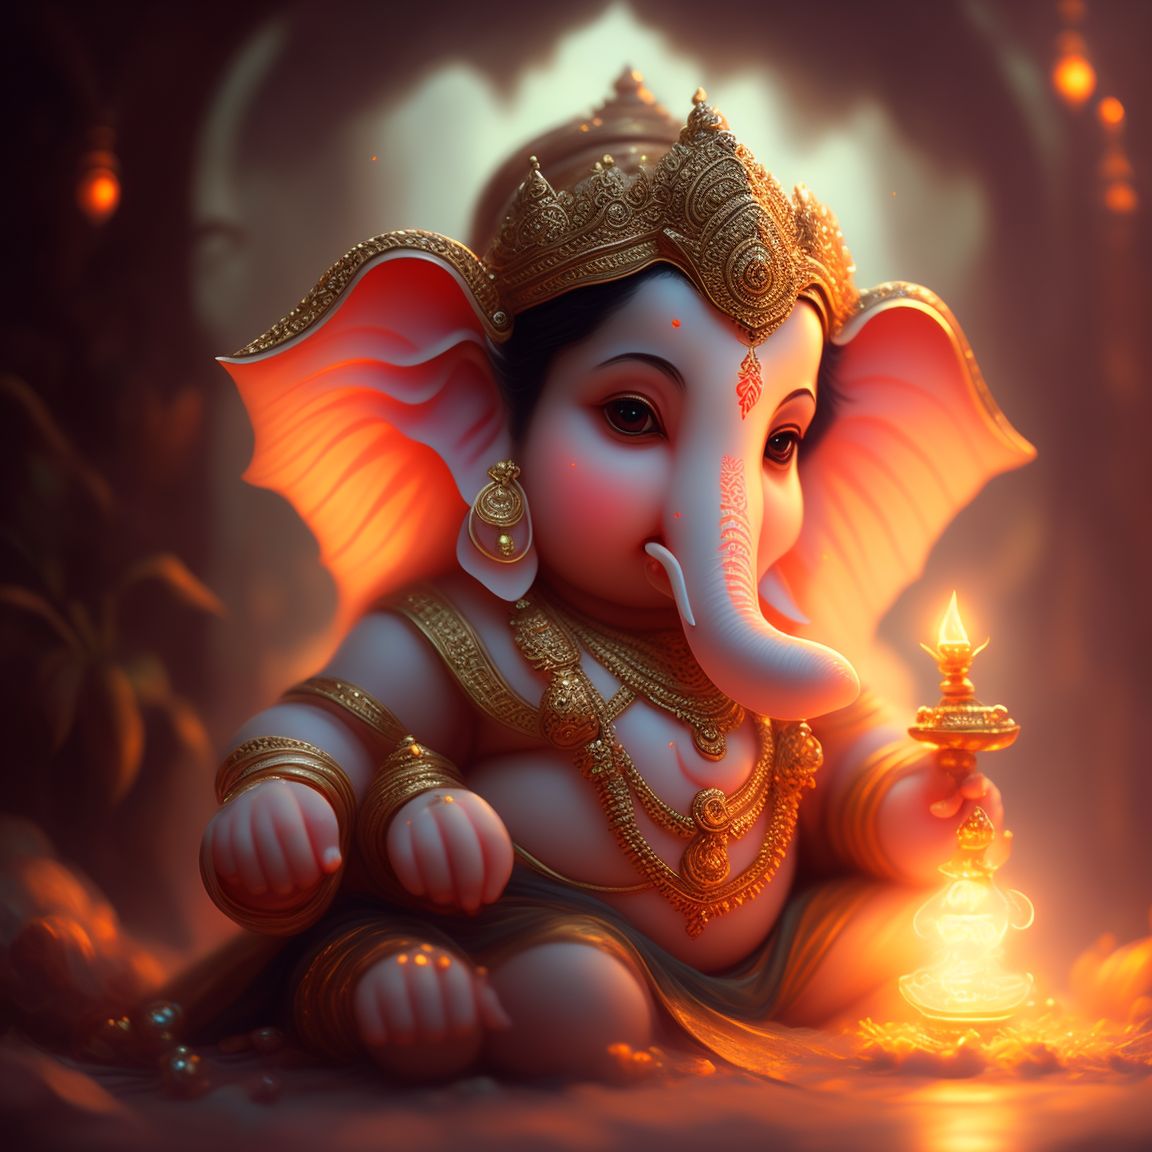 nutty-turtle988: Baby Lord Ganesh